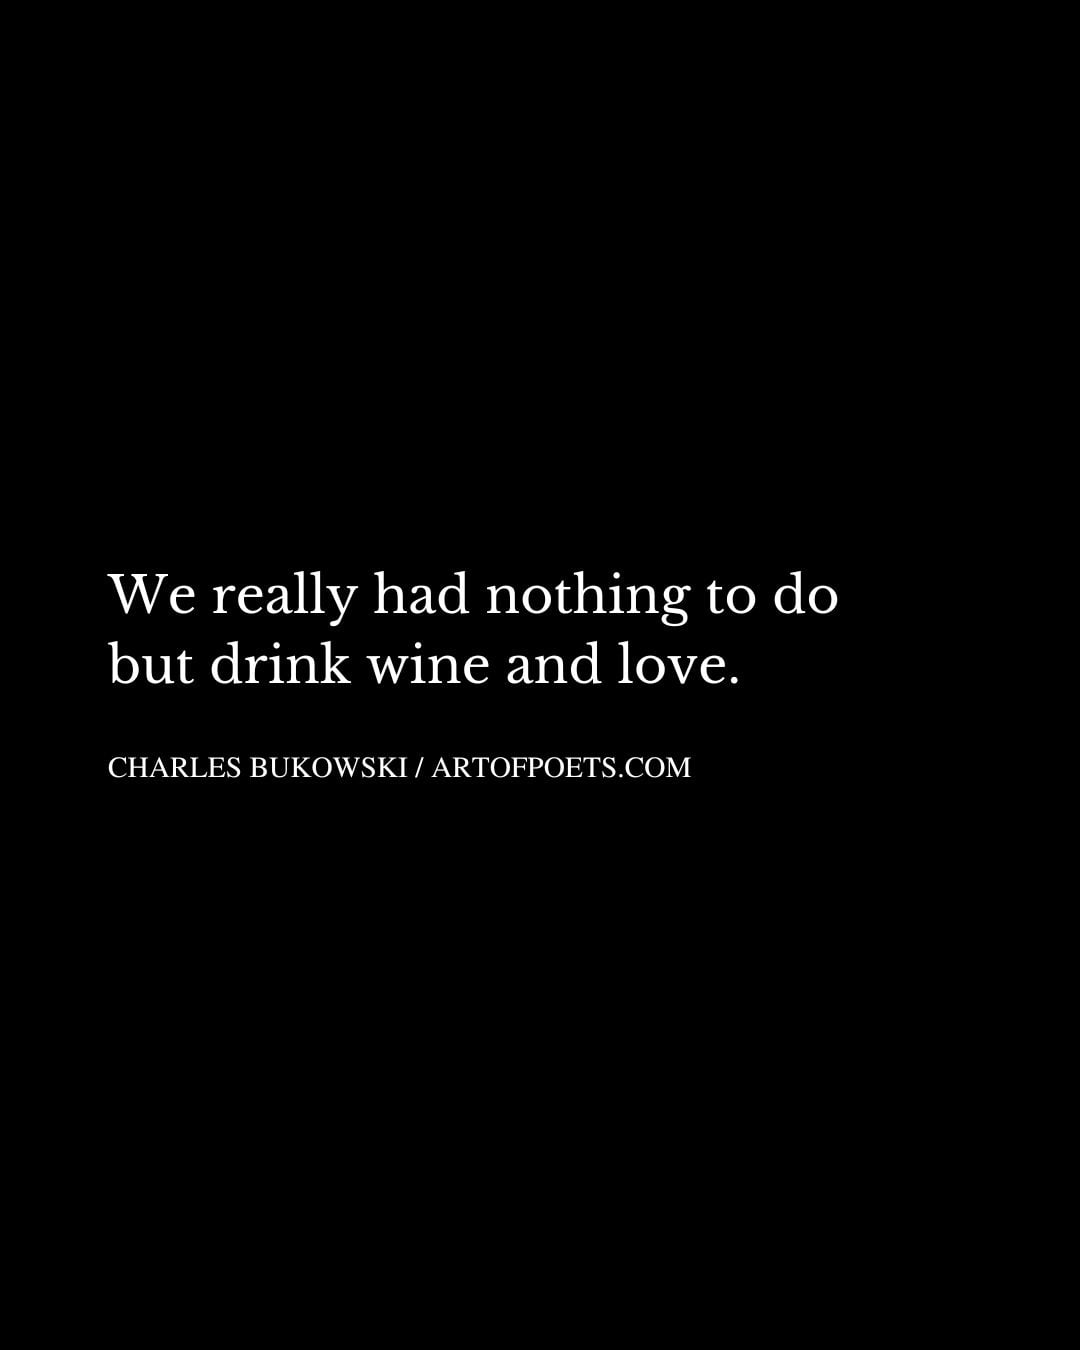 We really had nothing to do but drink wine and love